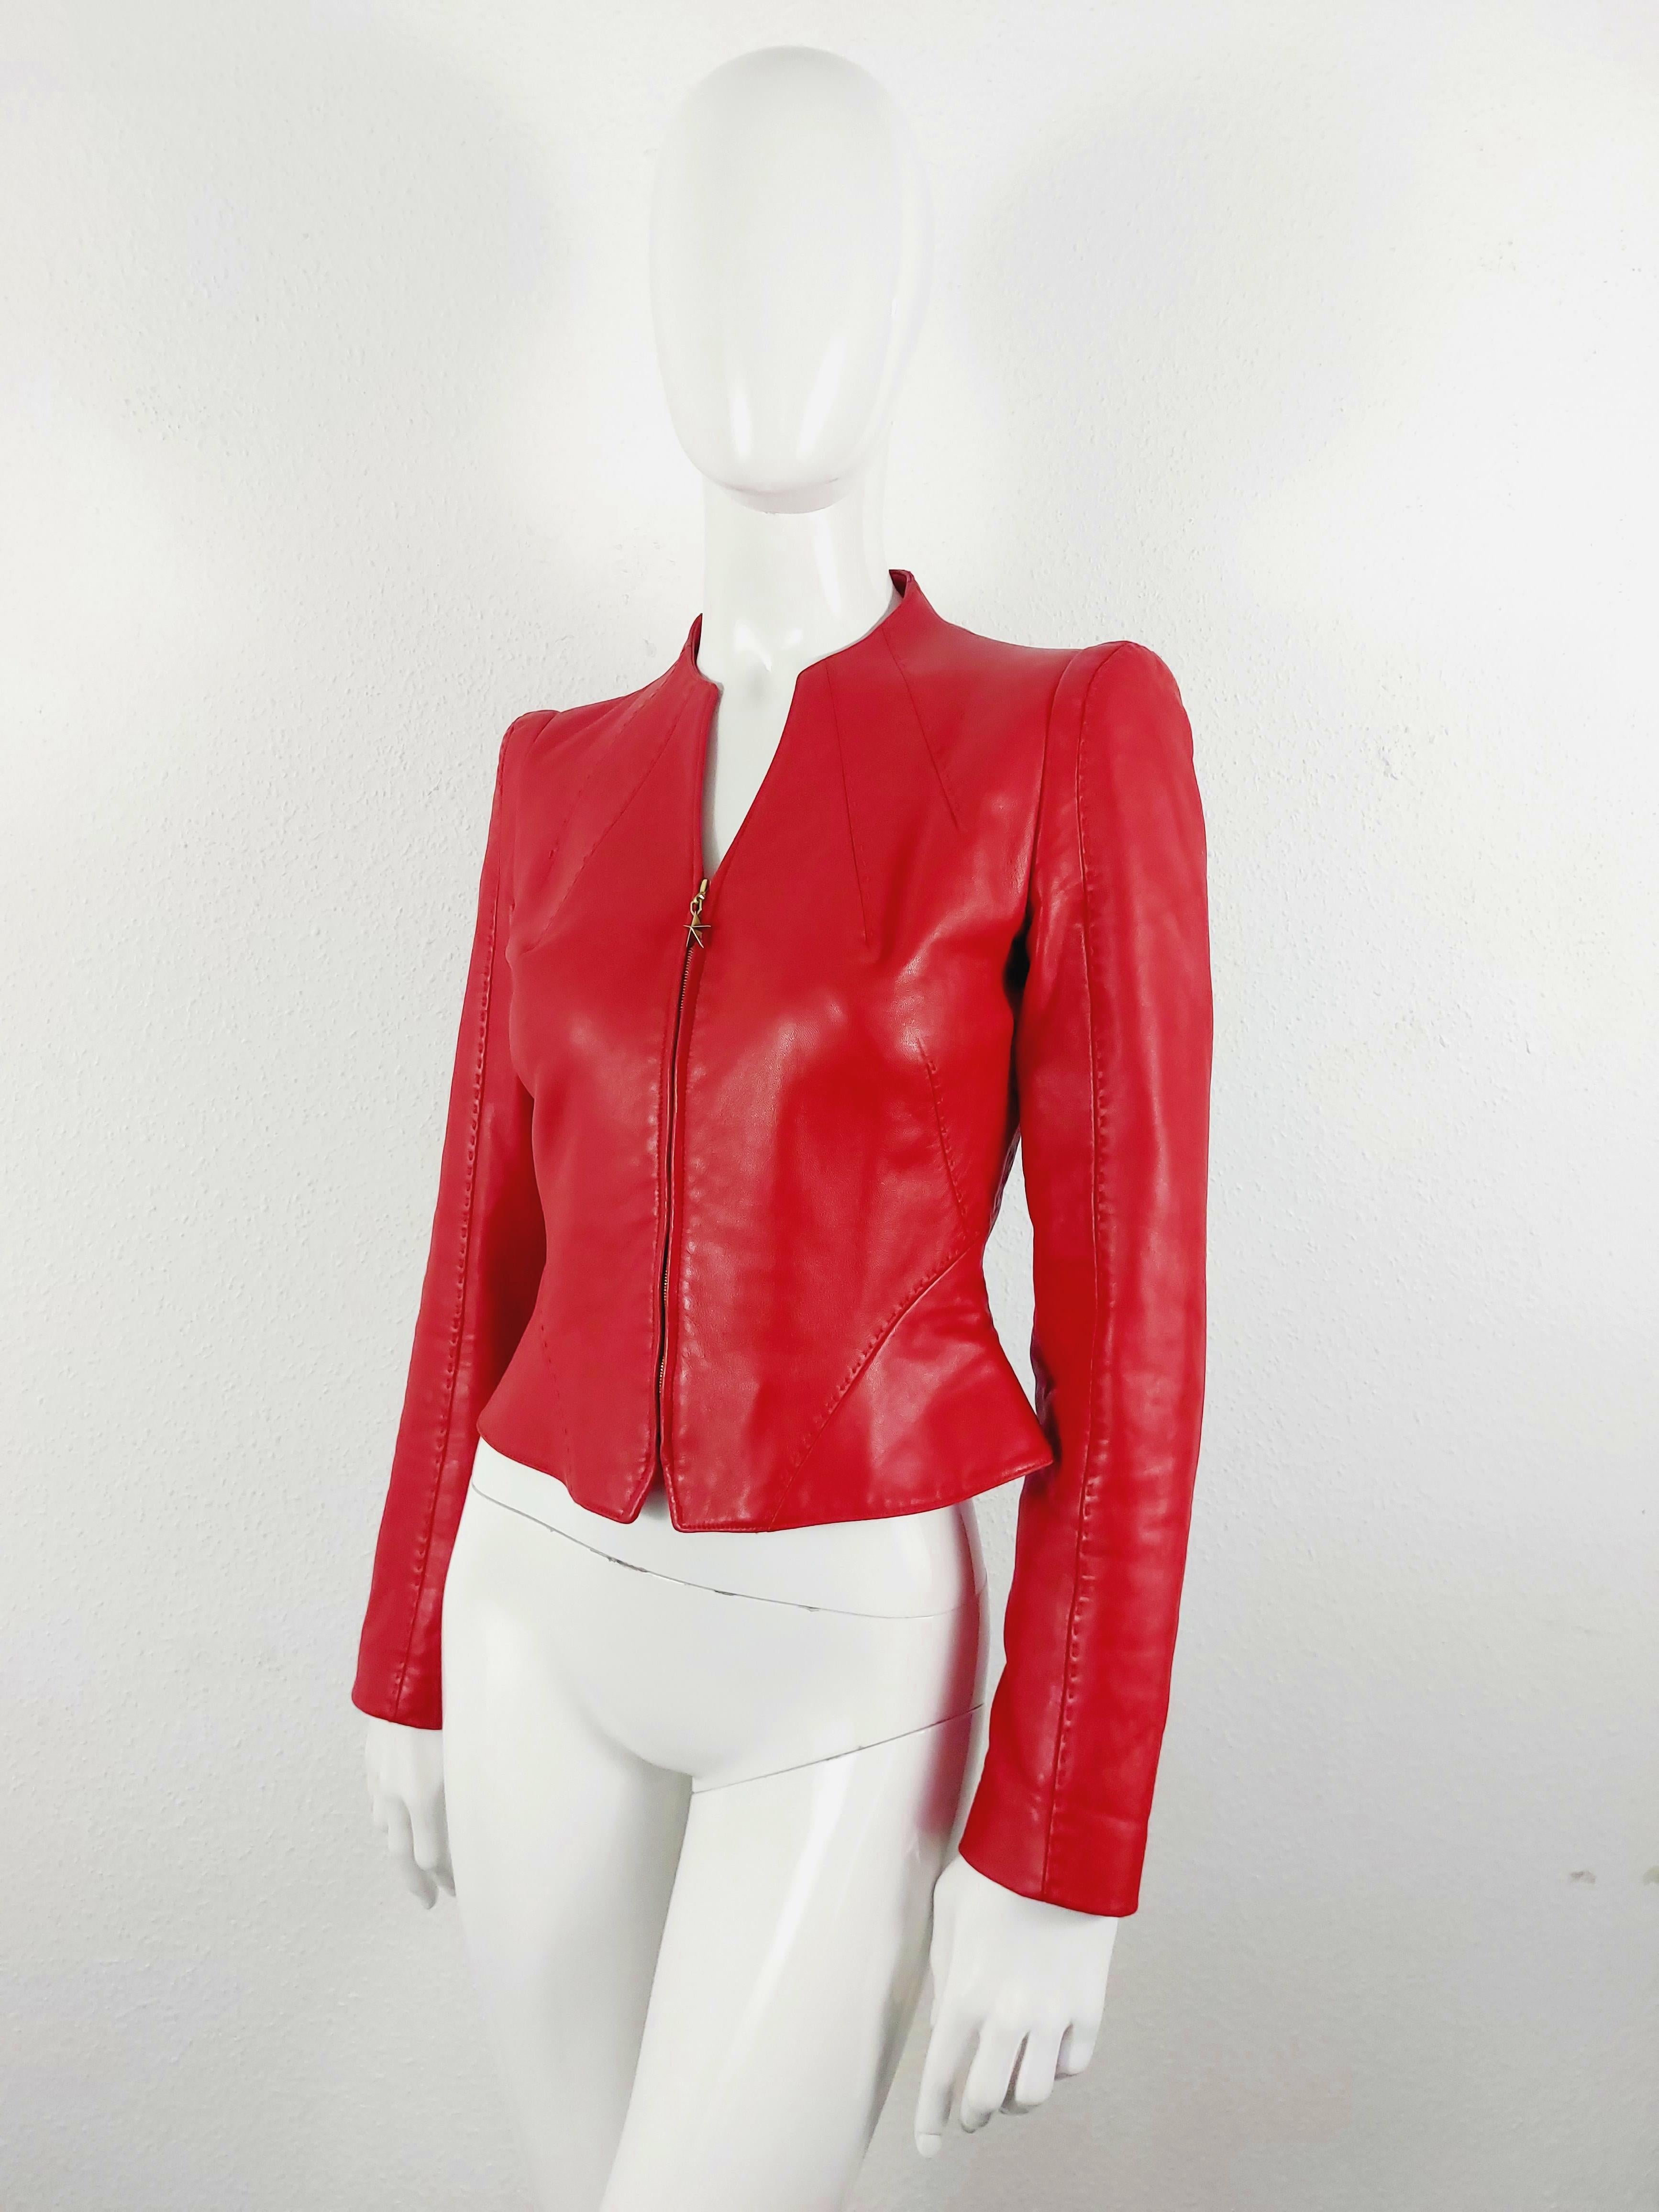 Thierry Mugler Couture Red Leather Lamb Runway Wasp Waist Motorcycle 90s Black Vintage Blazer Jacket Veste 

Rare Lamb Leather jacket by Thierry Mugler!


VERY GOOD condition! Minimal signs of wear outside, please check the photos! Minimal